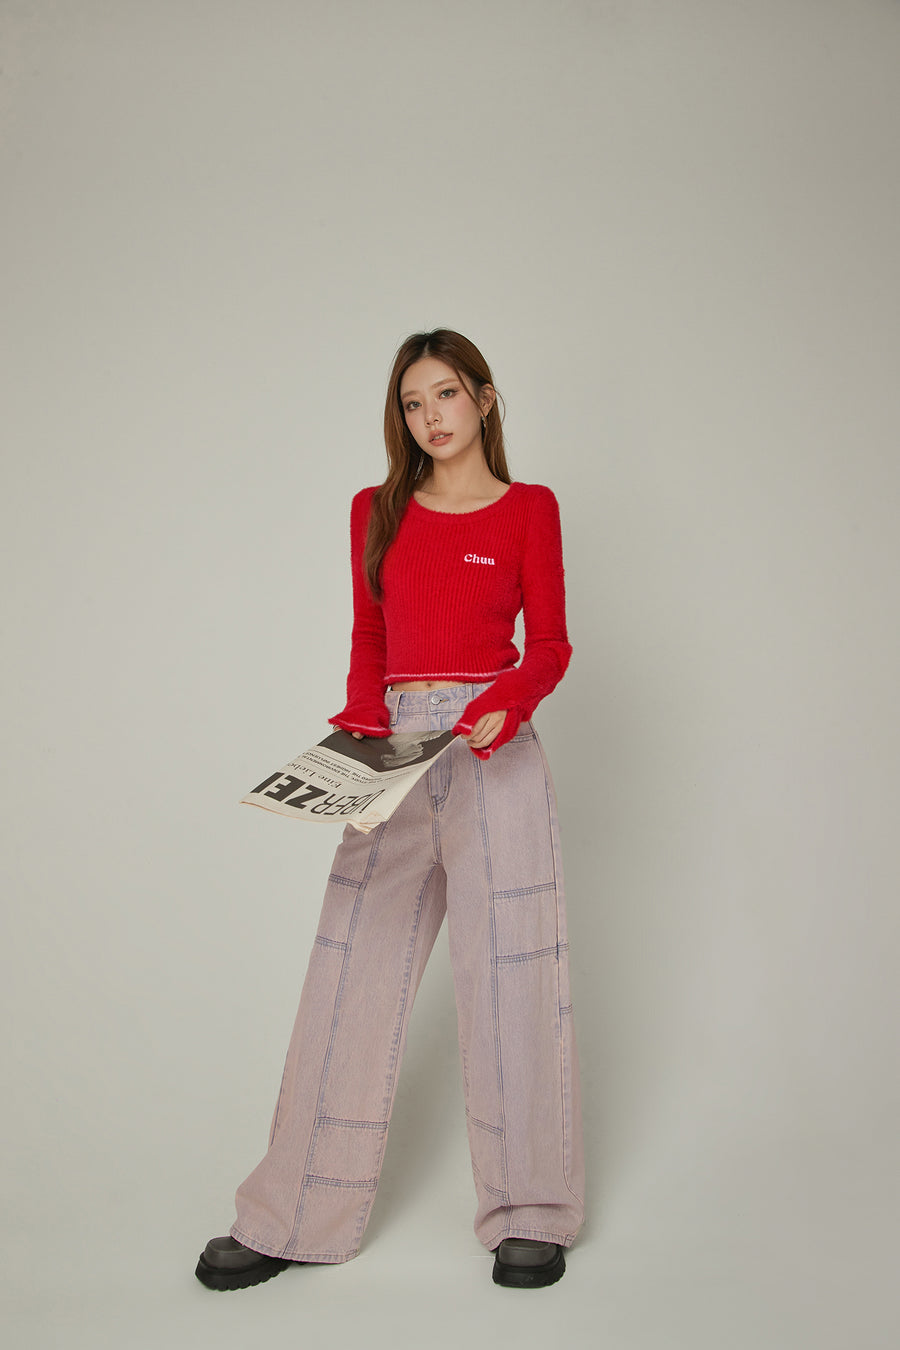 CHUU Slit Sleeves Button Crop Knit Sweater